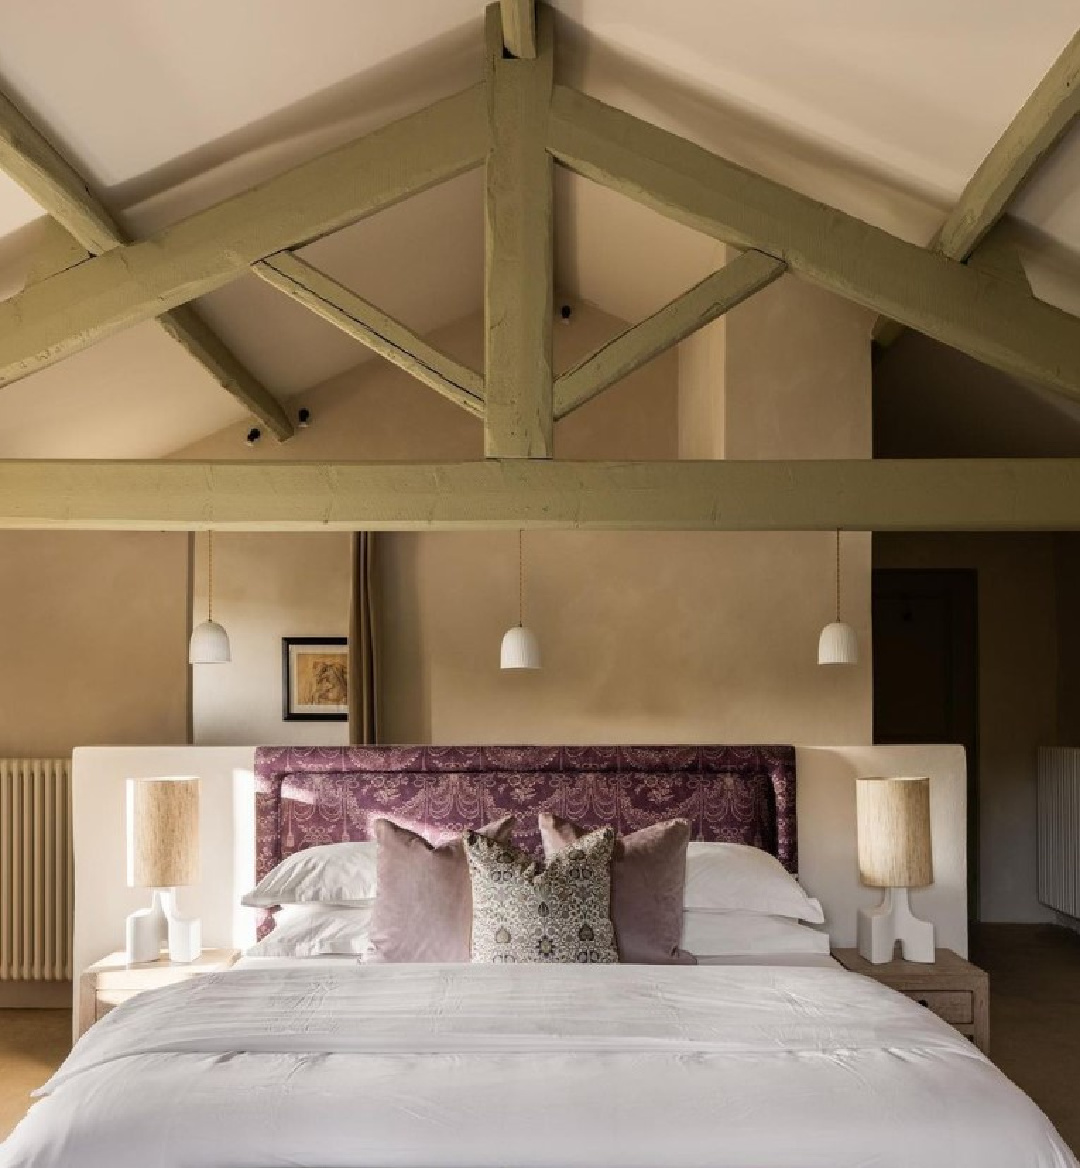 French country bedroom. Warm European luxury and cozy opulence in a French vacation villa in Provence - La Bastide de Laurence. #frenchbastide #frenchvilla #luxuryvilla #provencevilla #warmeuropeanluxury #cozyopulence #frenchcountryinterior #frenchcountryarchitecture